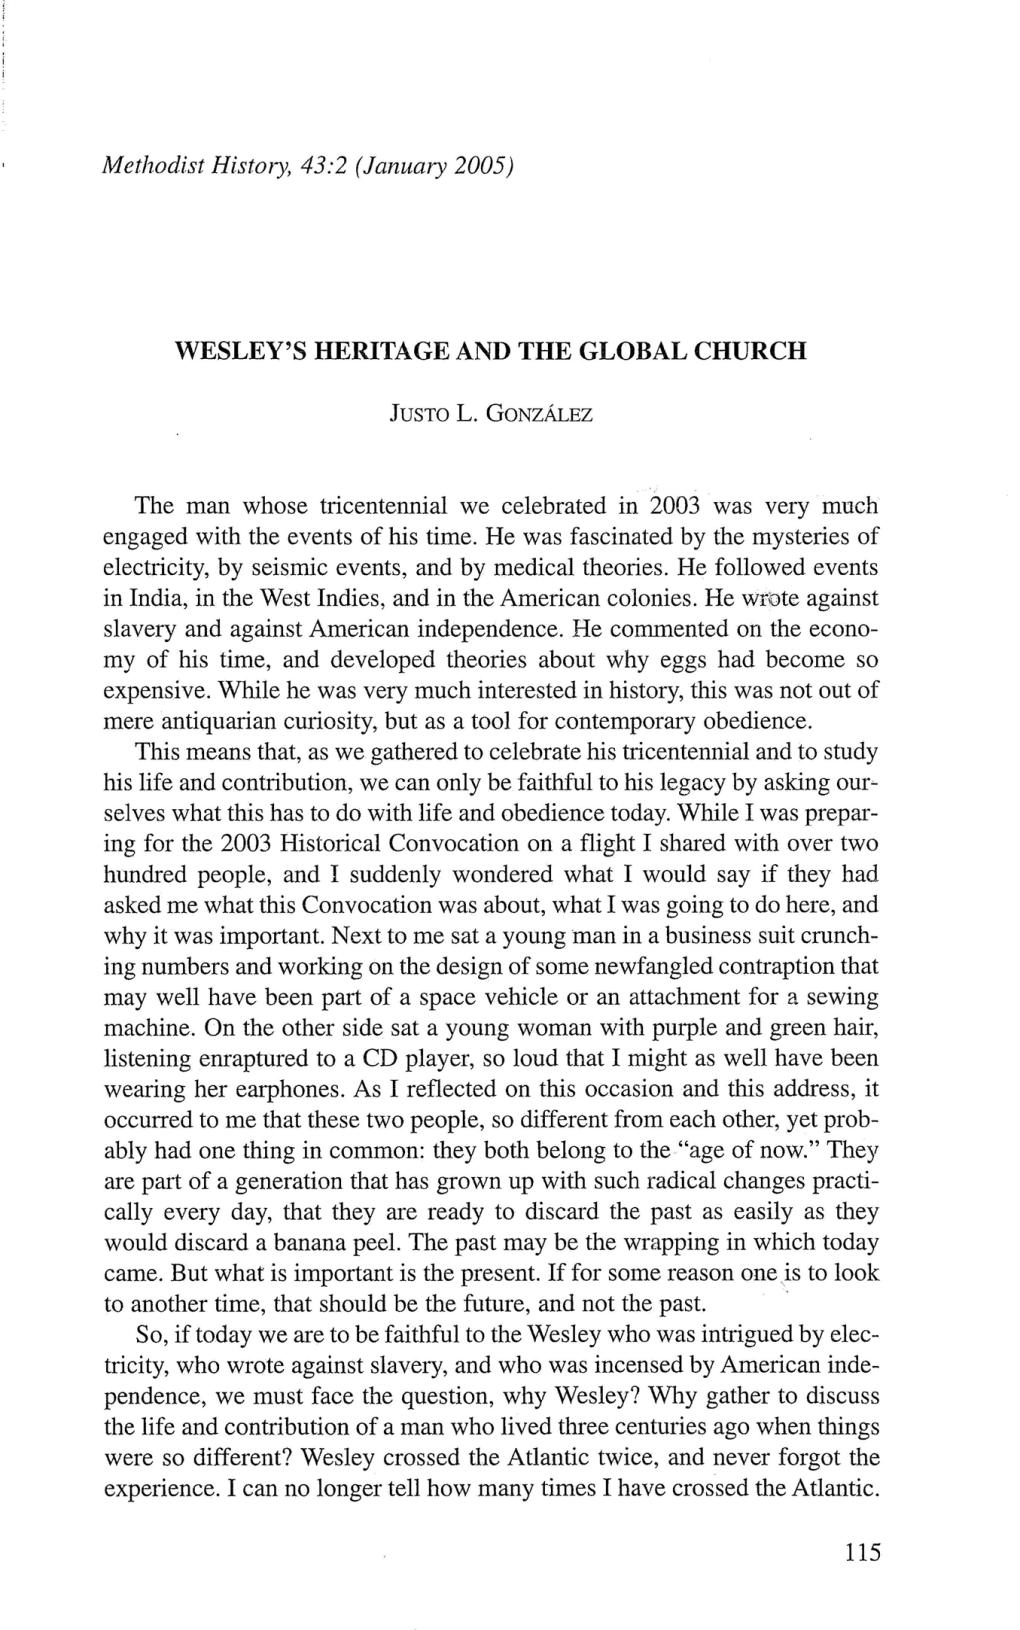 Wesley's Heritage and the Global Church